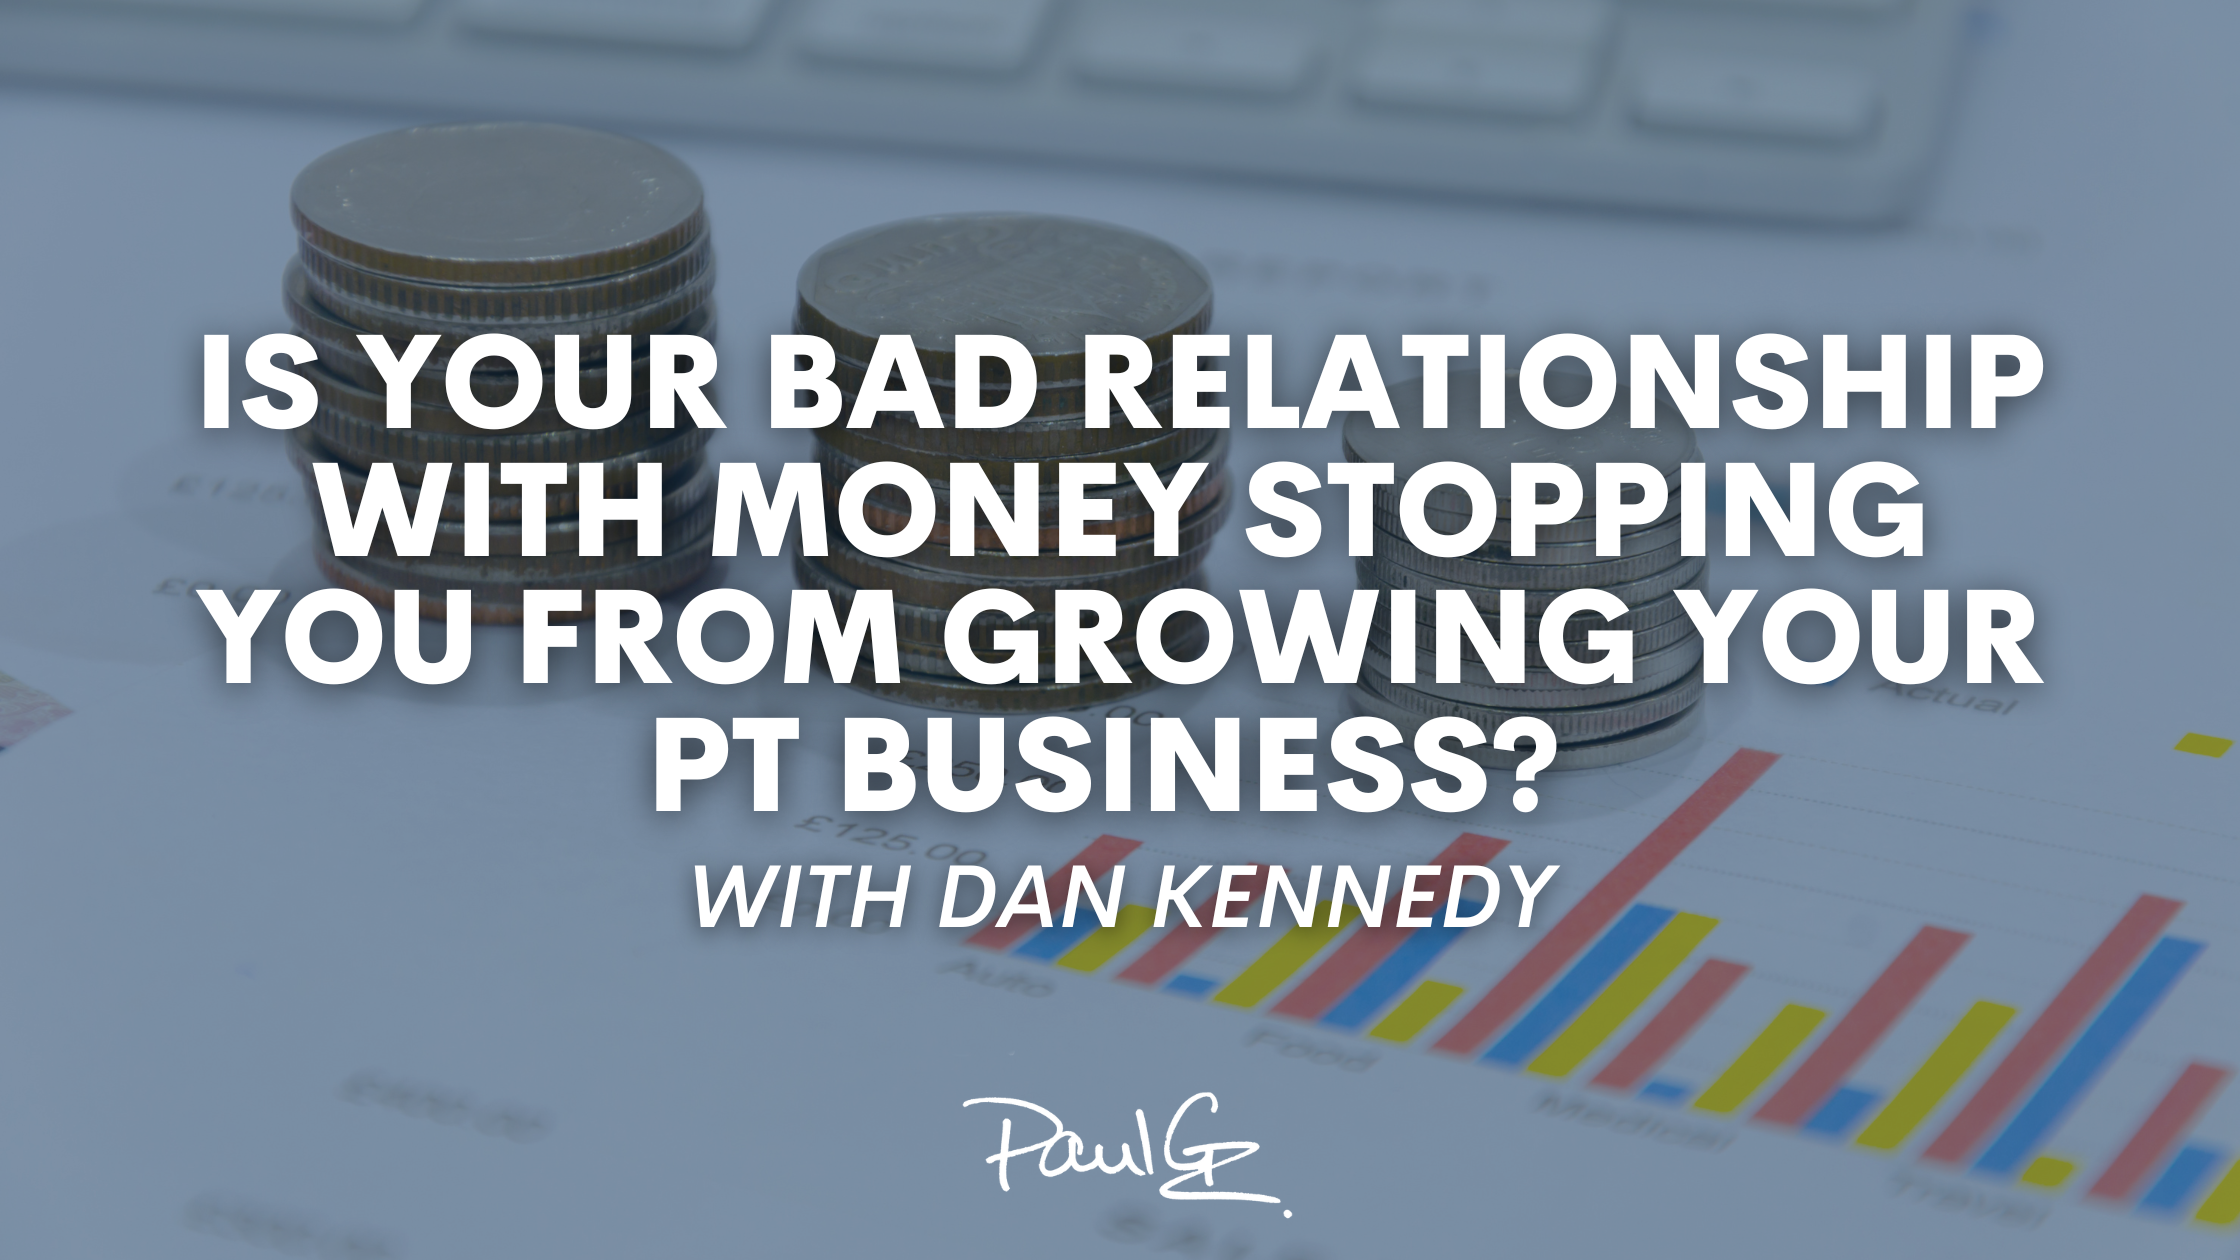 Is Your Bad Relationship With Money Stopping You From Growing Your PT Business?